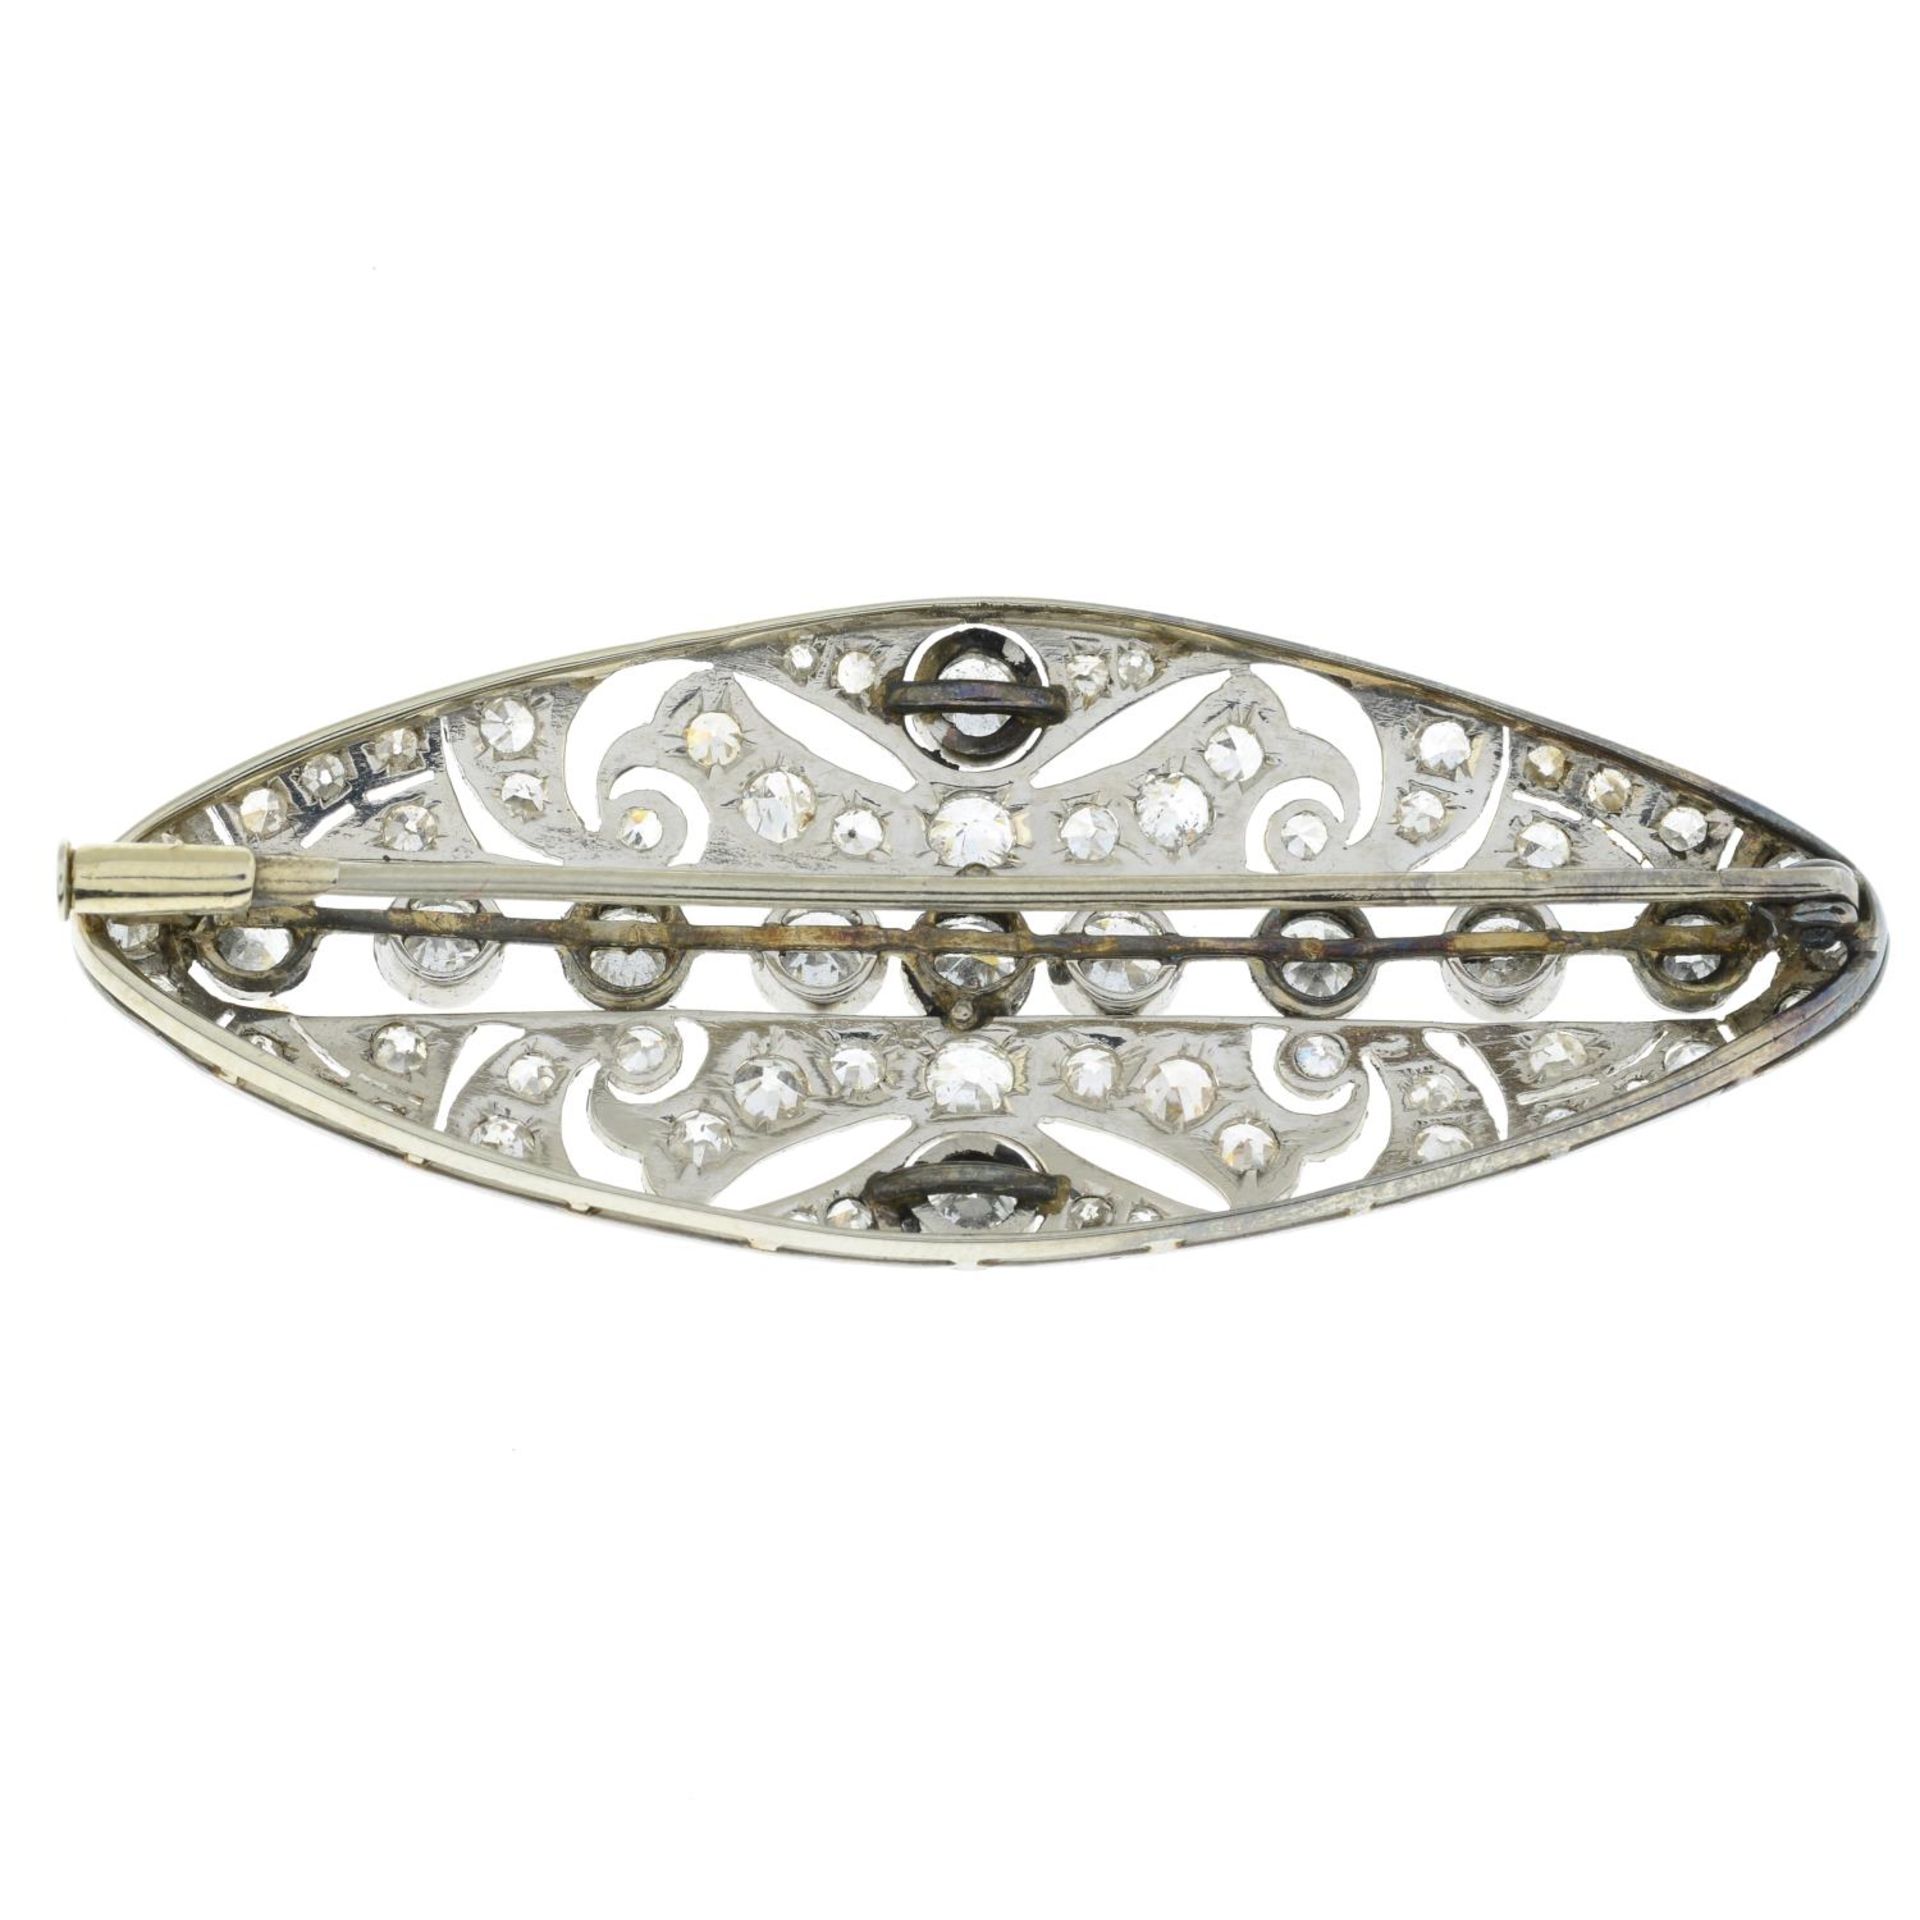 An early 20th century old-cut diamond brooch.Estimated total diamond weight 3.50cts, - Image 2 of 3